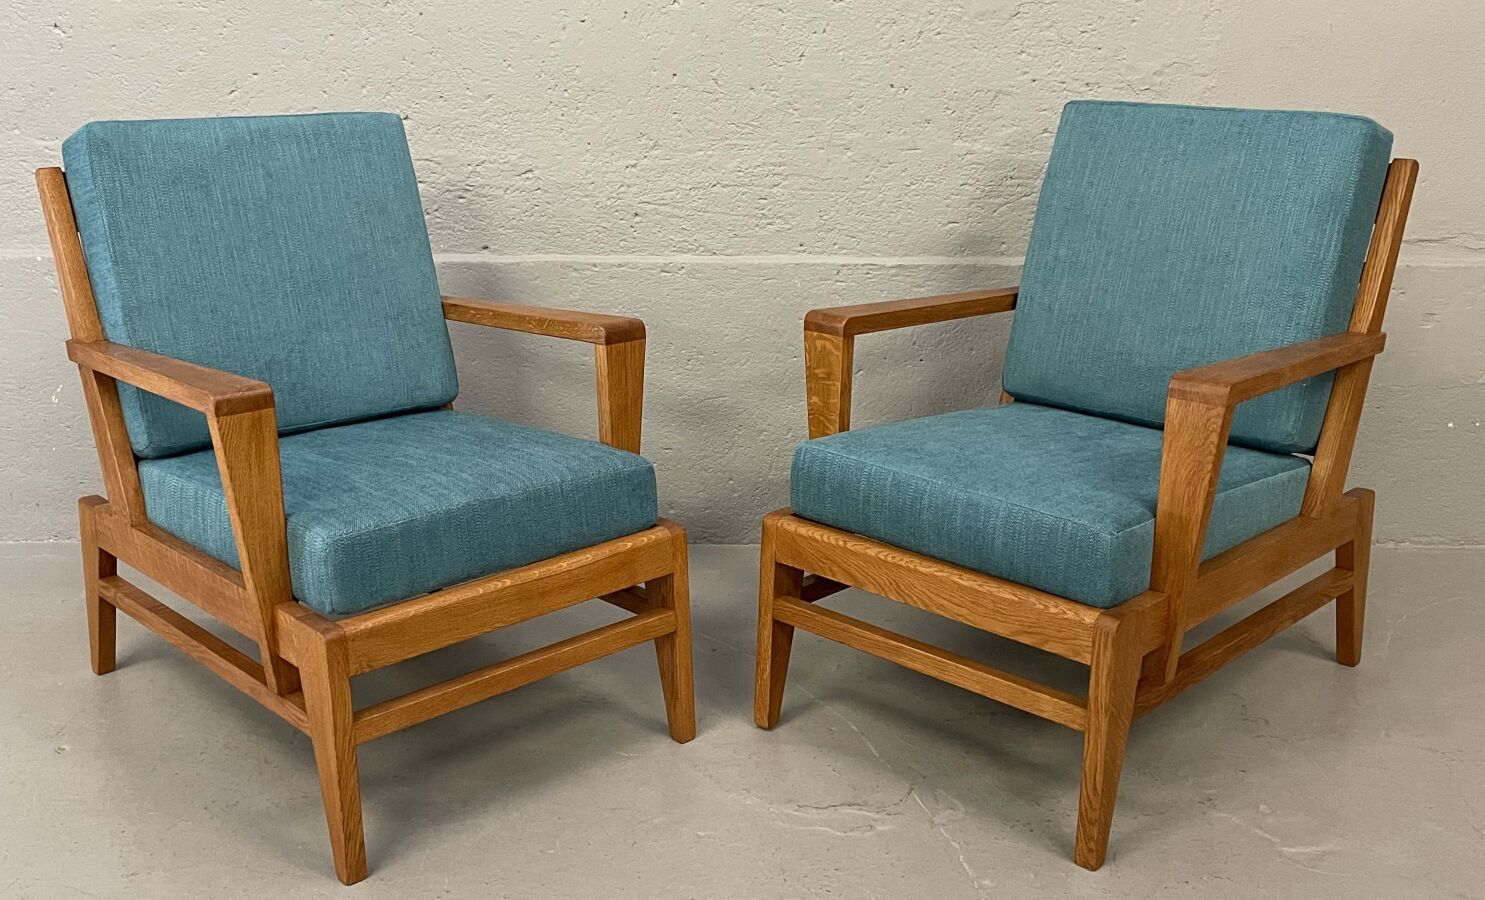 Null Attributed to René GABRIEL (1890-1950)
Pair of armchairs with oak structure&hellip;